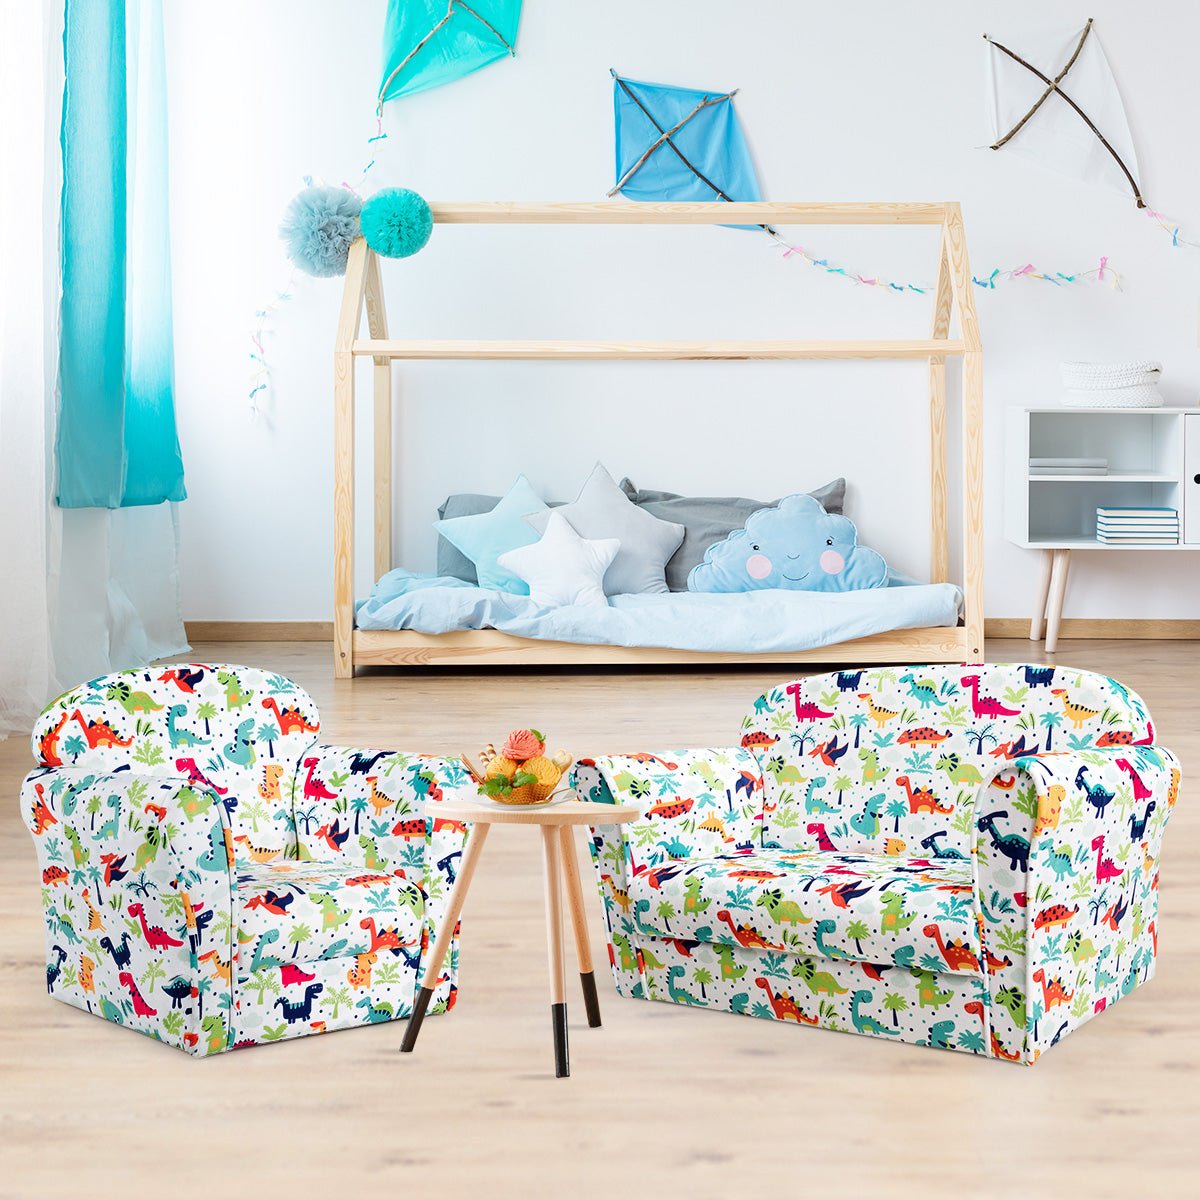 Velvet Kids Sofa with Sweet Pattern: Nurture Comfort in Baby's Special Place